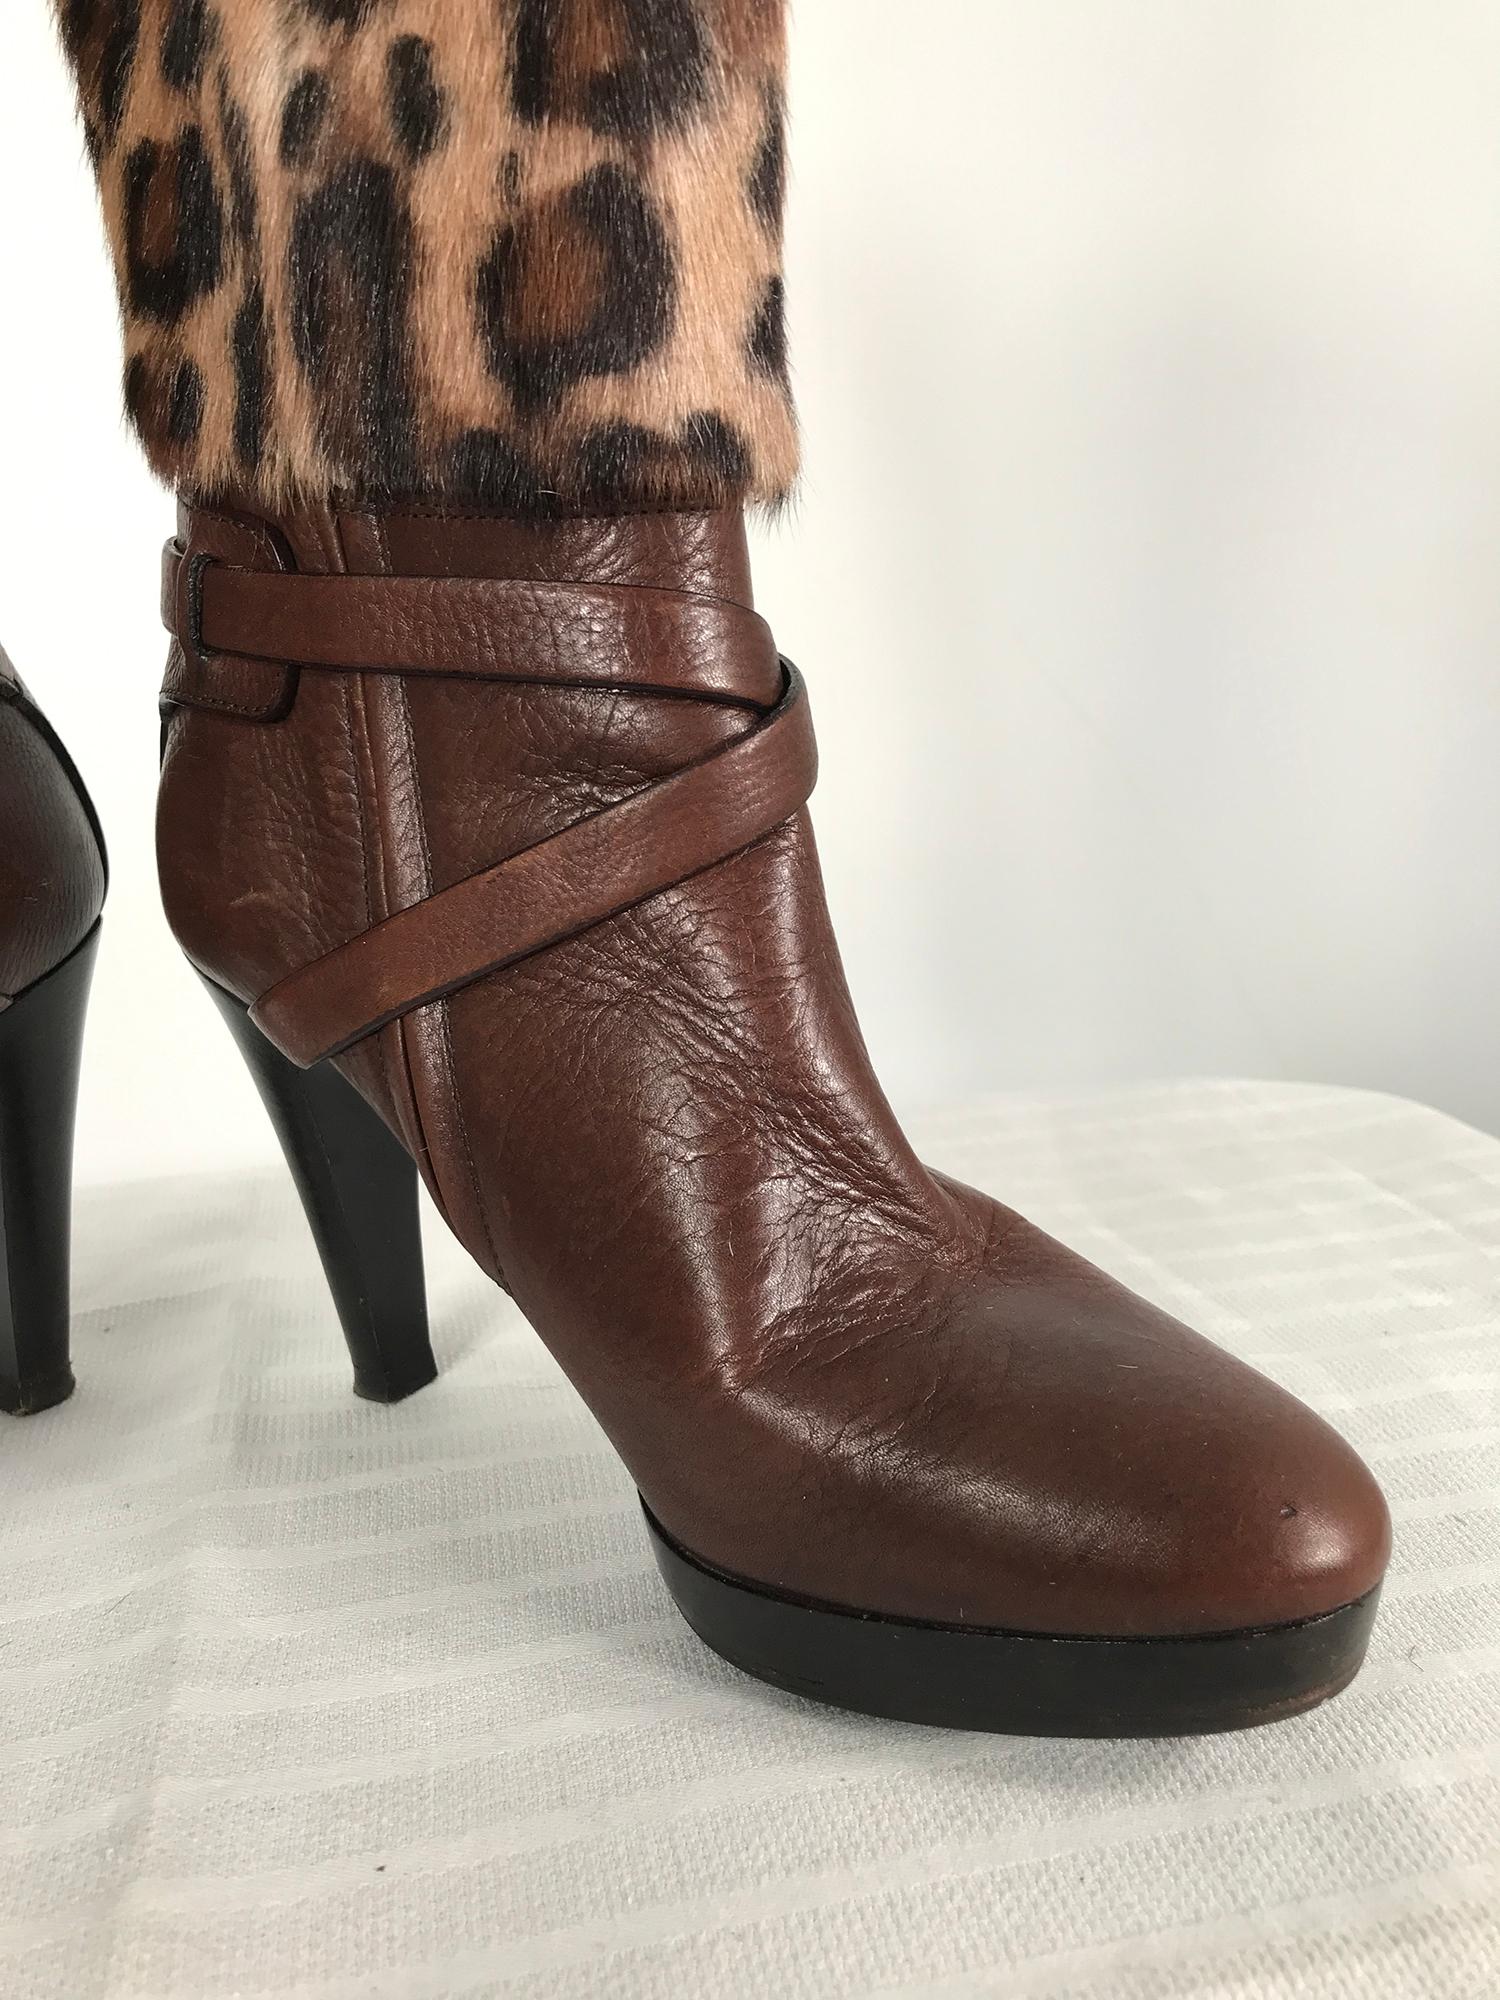 Ralph Lauren Collection spotted fur & leather high heel platform boots 8B. Knee high boots. Knee high boots that close on the side with a zipper and logo tab. The shaft of the boot is fur, the lower part of the boot is leather, there are straps that